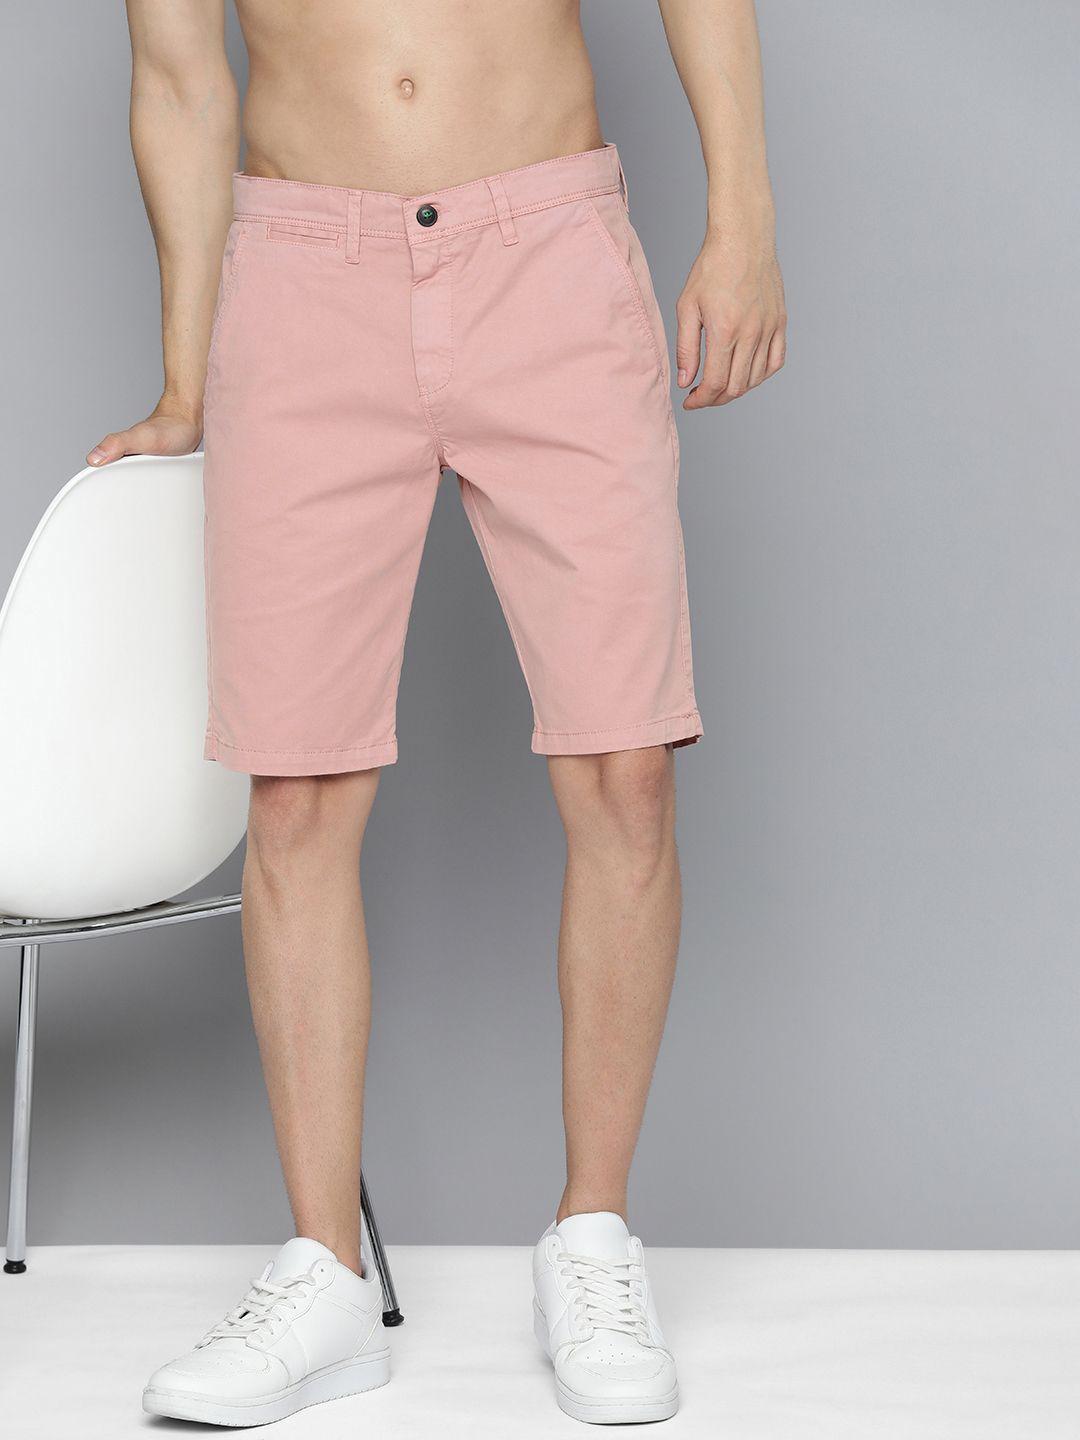 here&now-men-slim-fit-shorts